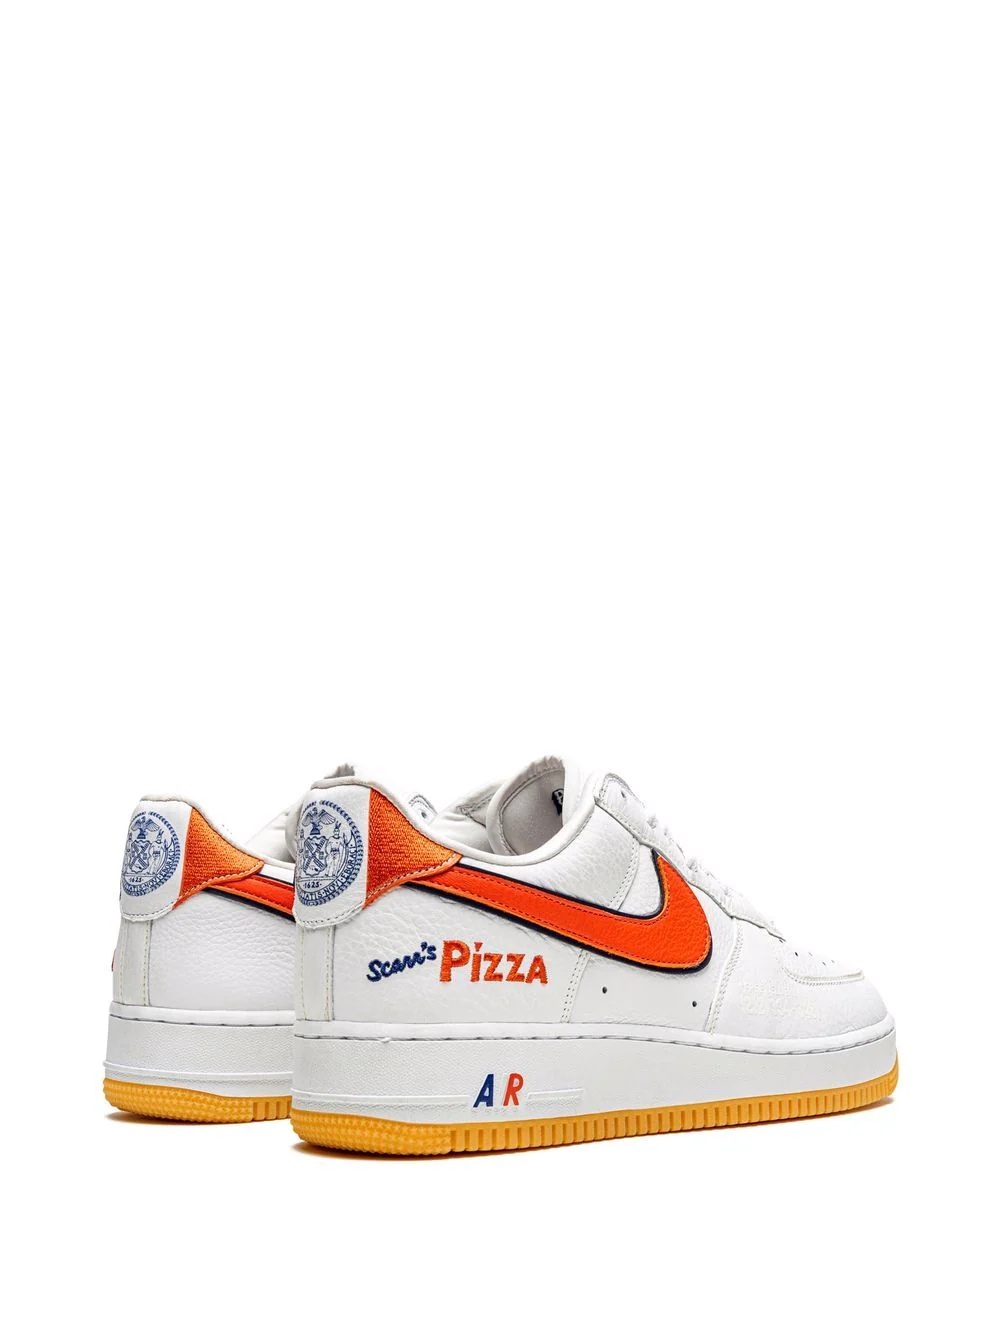 x Scarr's Pizza Air Force 1 Low sneakers - 3